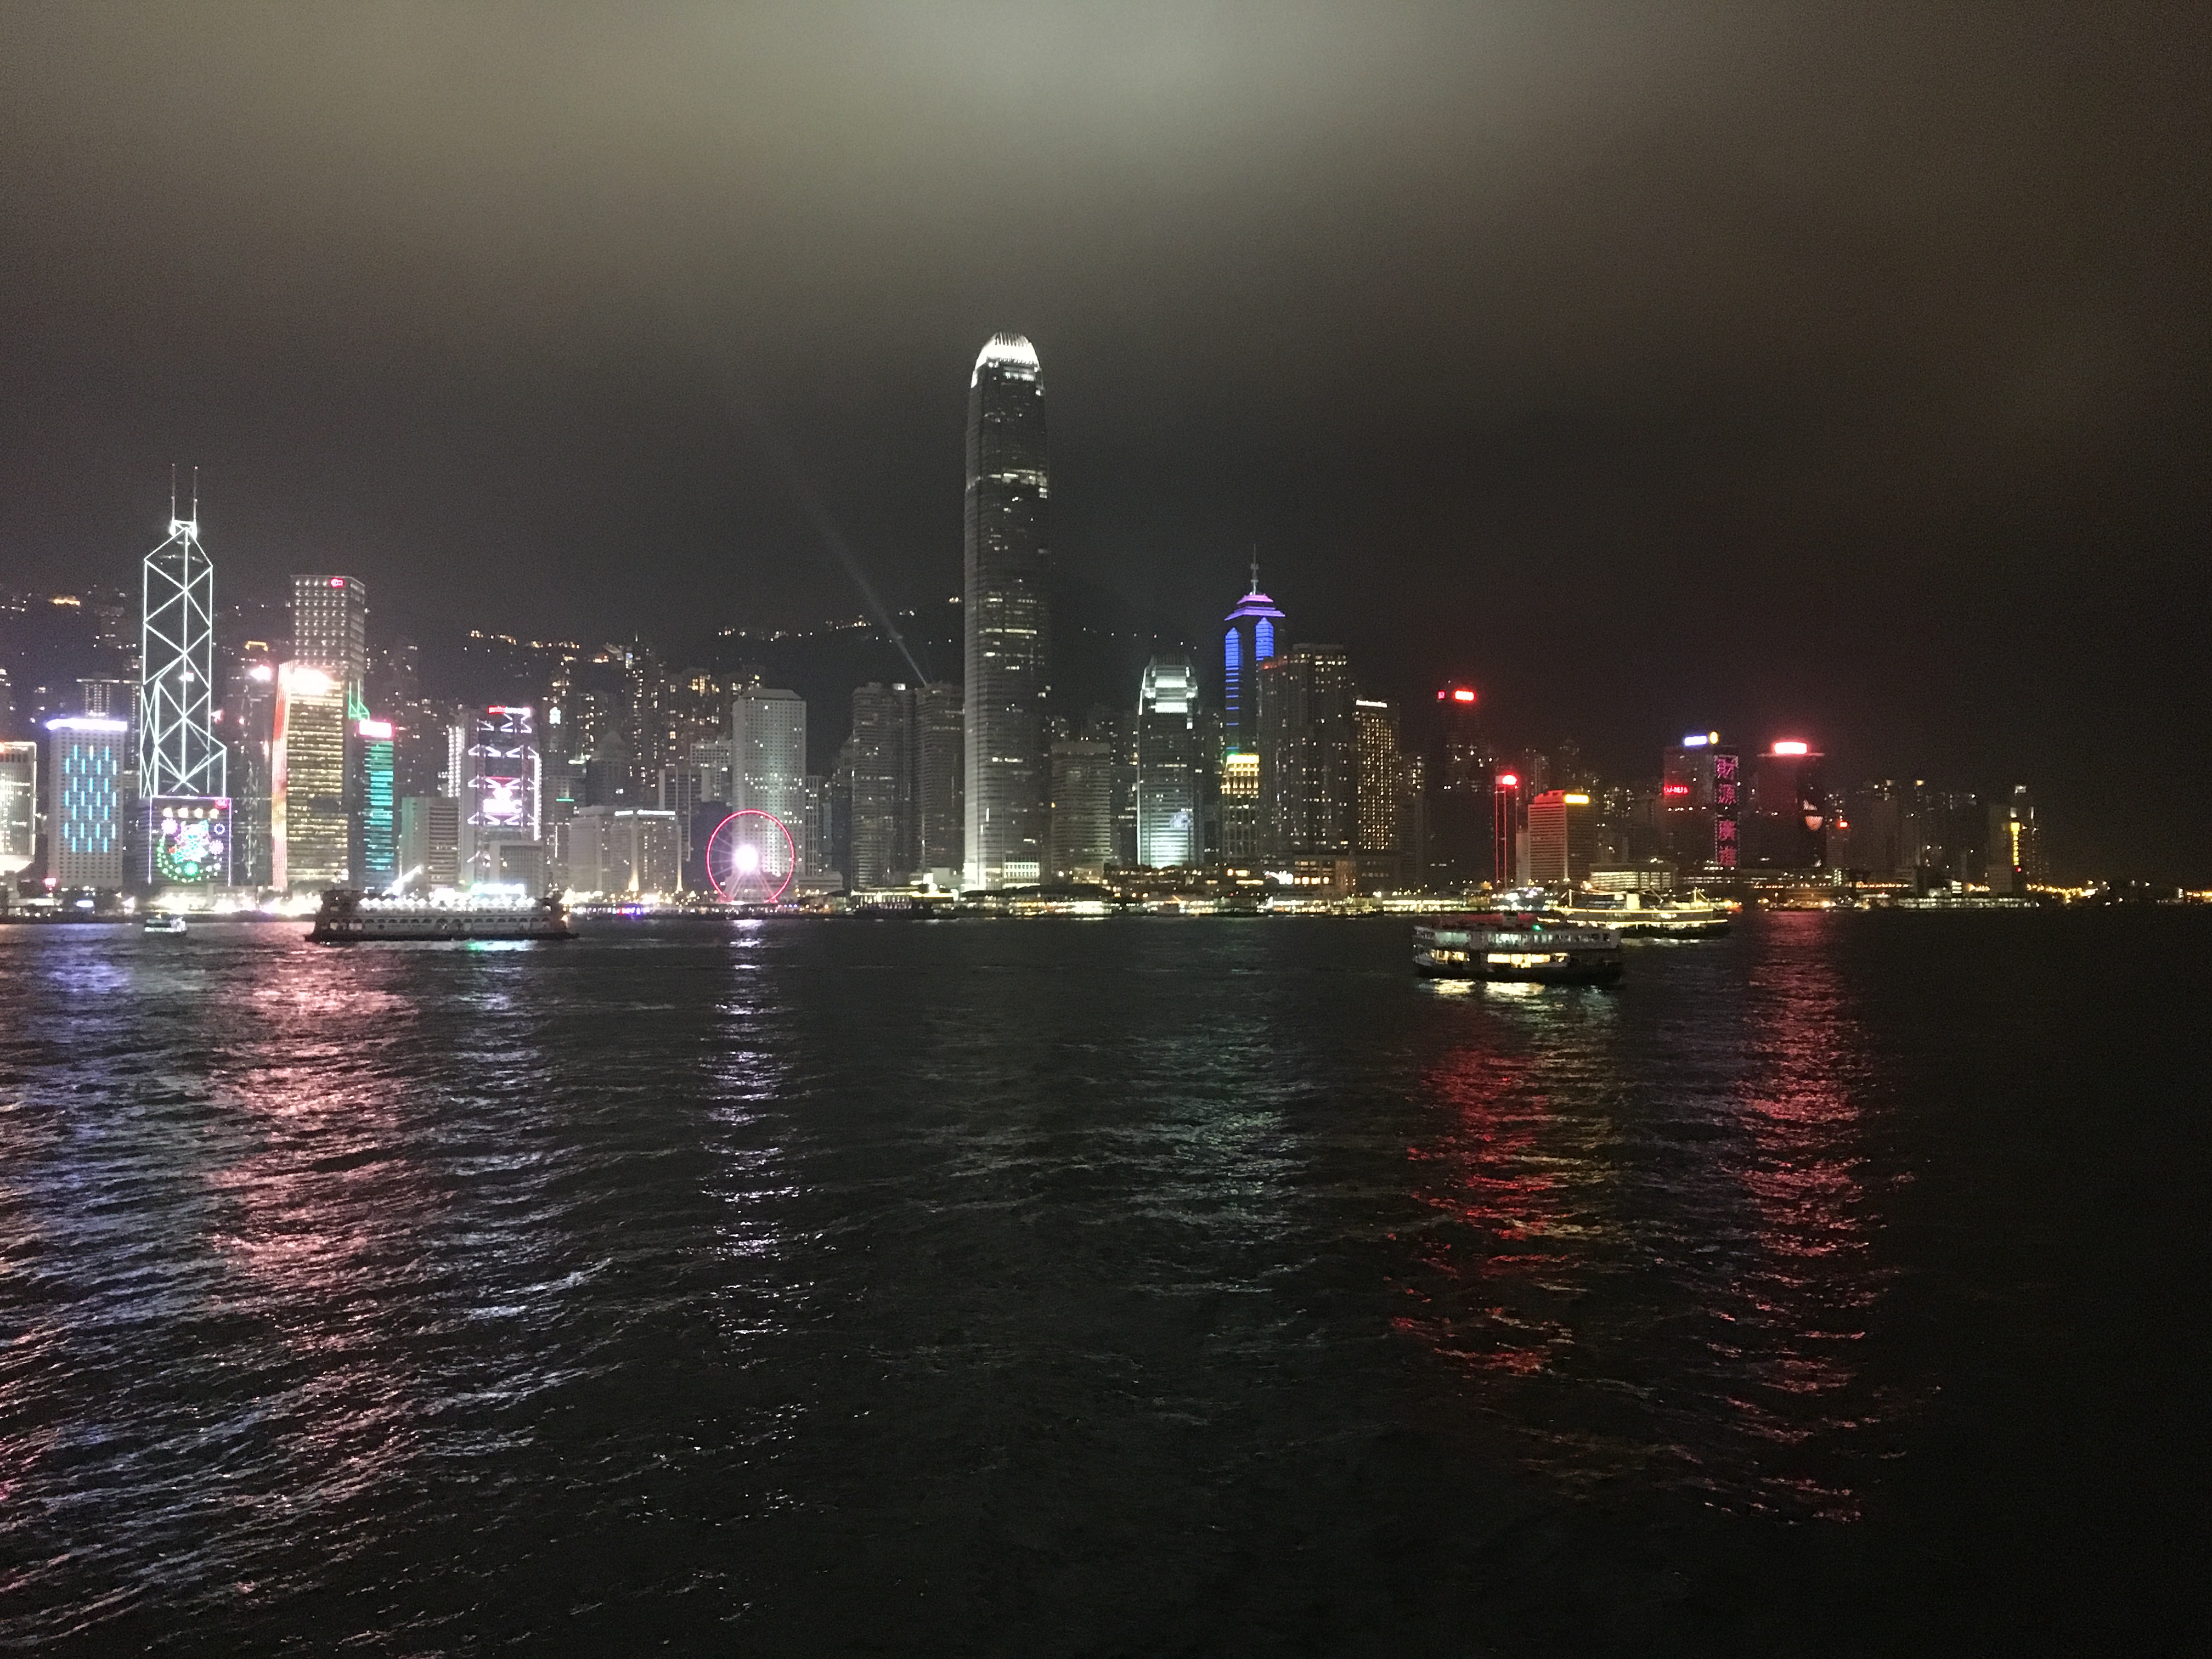 HK by dawn and Roof-top bar